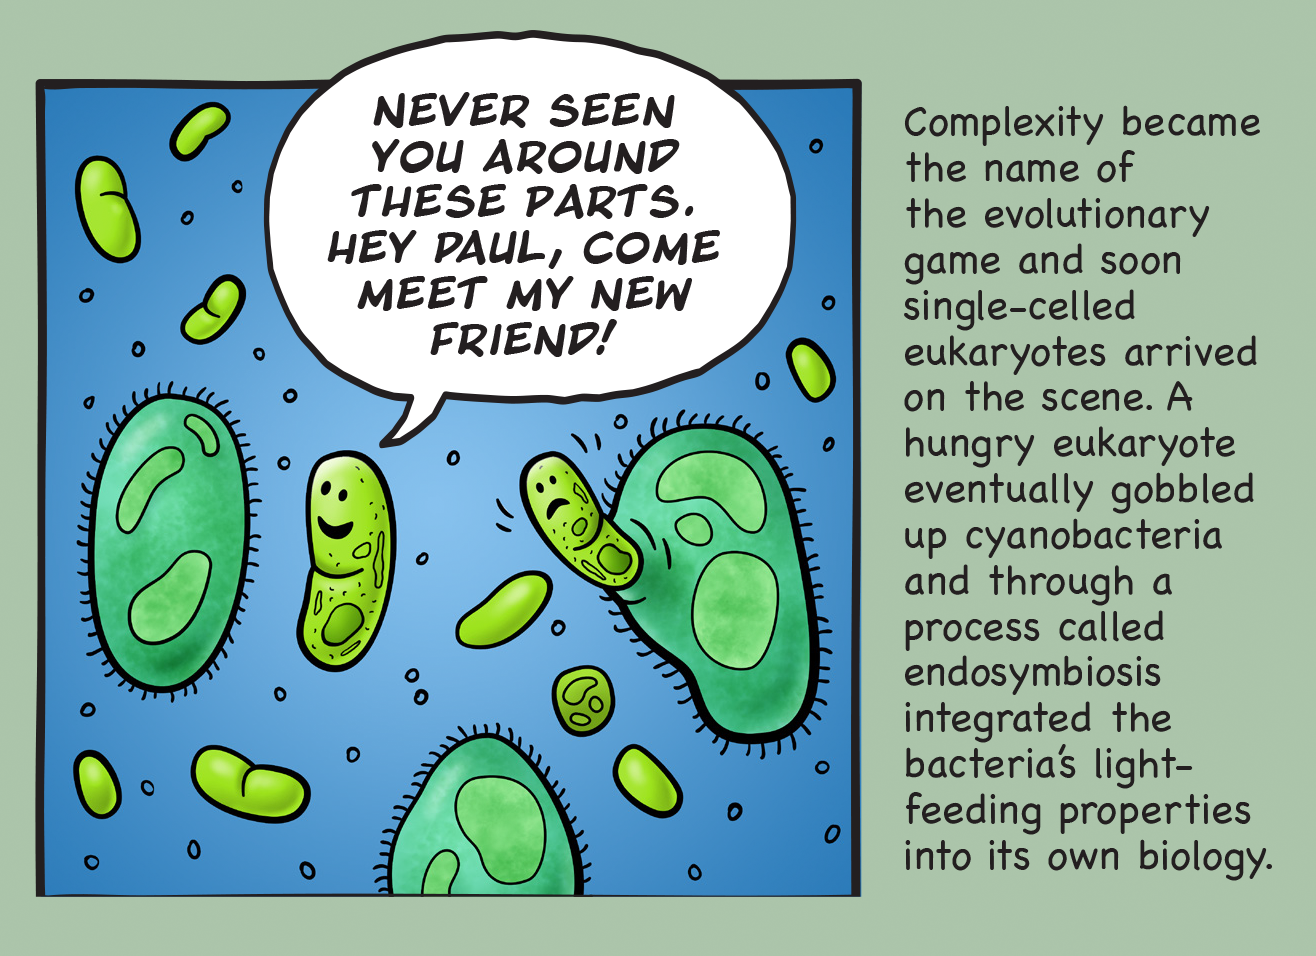 Complexity became the name of the evolutionary game and soon single-celled eukaryotes arrived on the scene. A hungry eukaryote eventually gobbled up cyanobacteria and through a process called endosymbiosis integrated the bacteria's light-feeding properties into its own biology